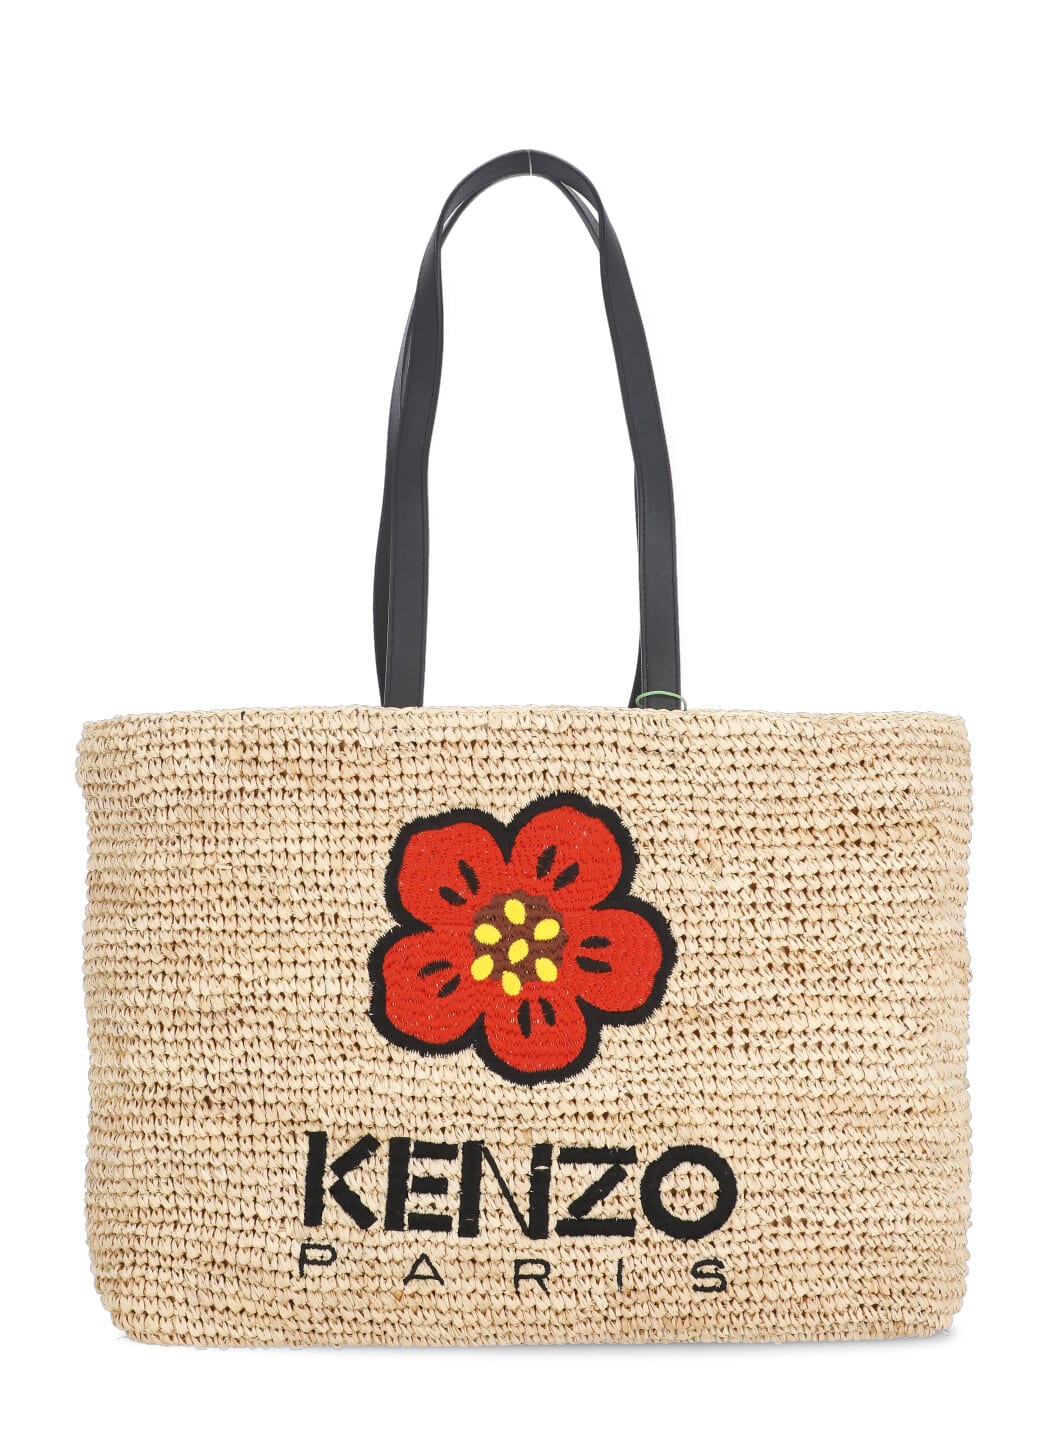 Kenzo Bag With Boke Flower Embroidery